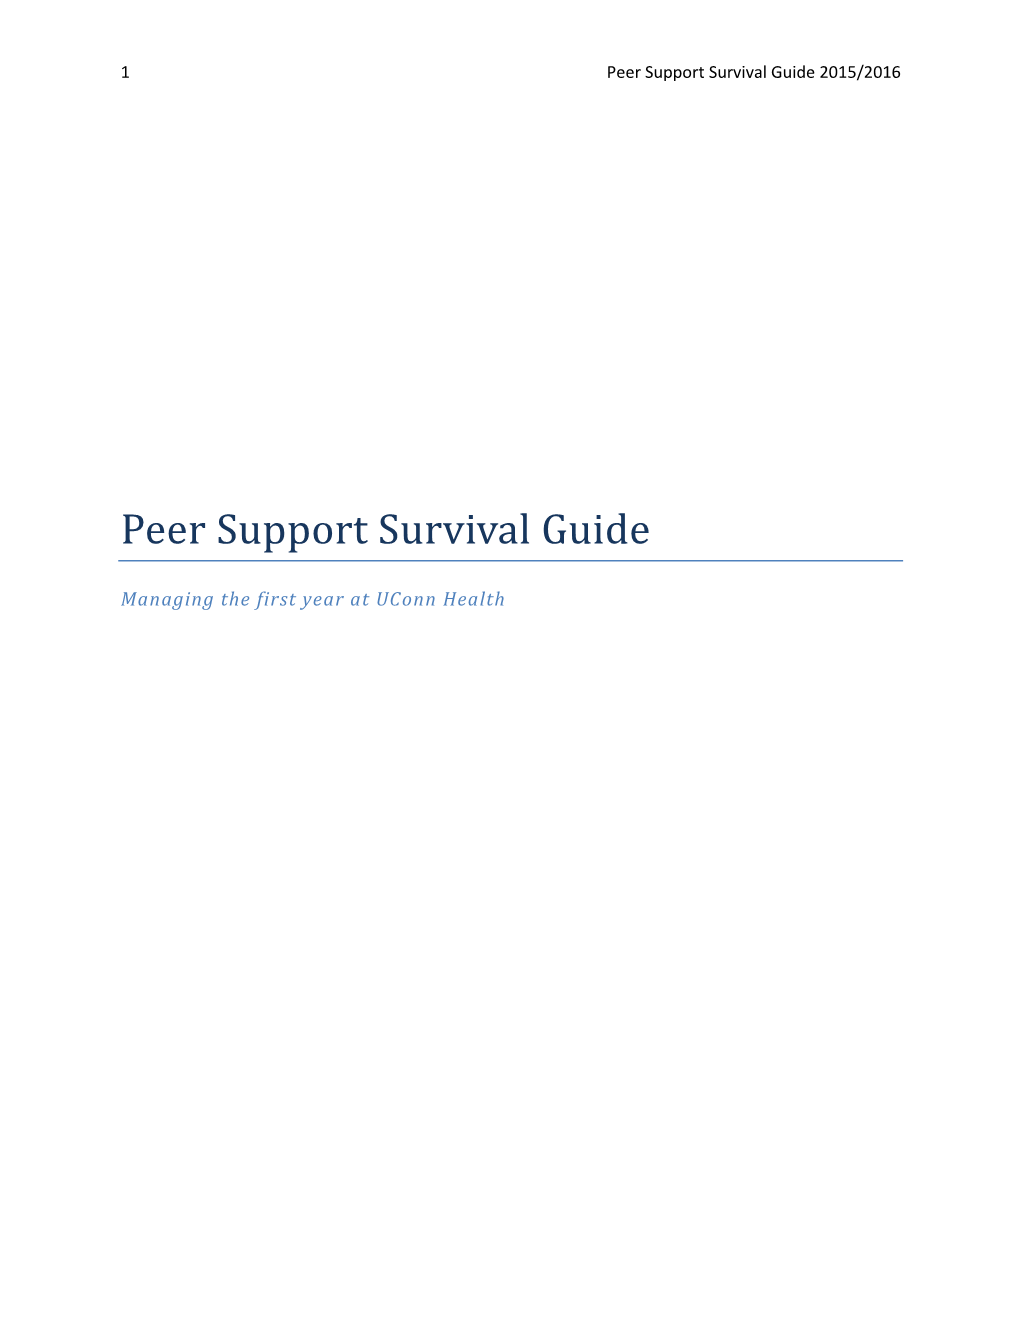 Peer Support Survival Guide 2015/2016